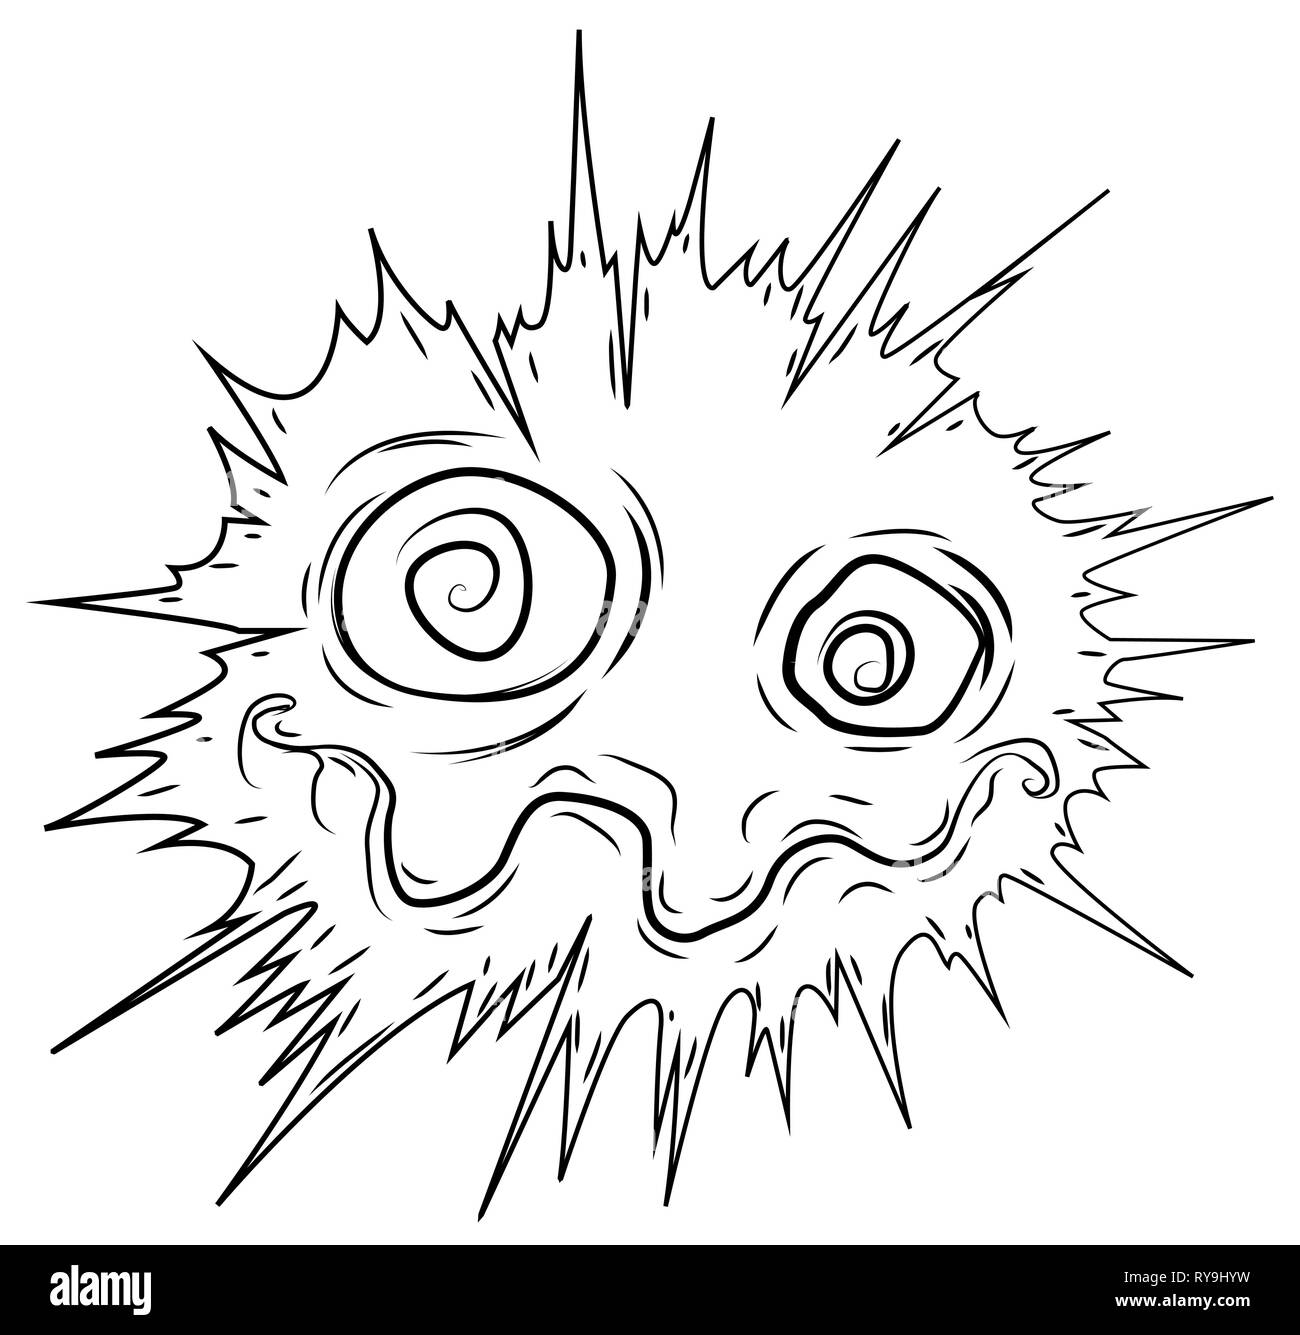 freaked out face cartoon